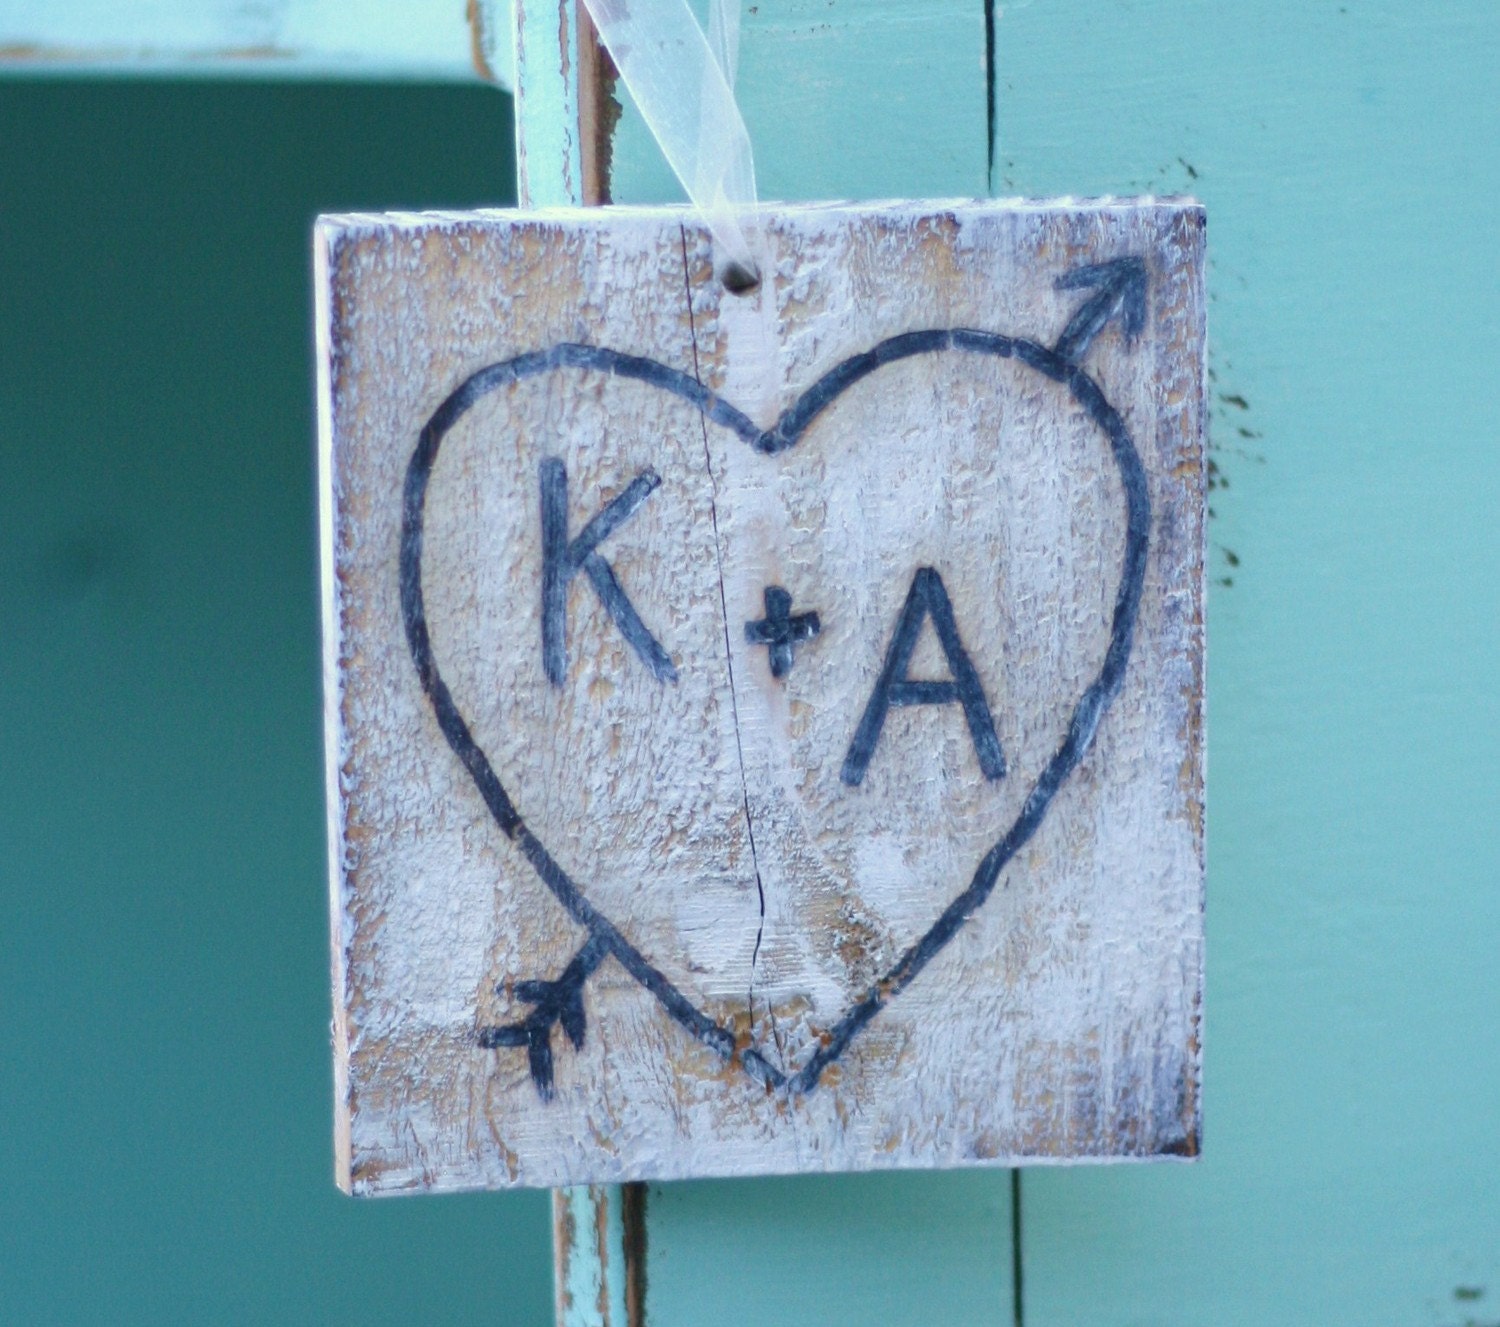 Carved On Rustic Old Barn Wood Heart And Arrow Personalized With Your Initials Vintage Wedding Sign Chair Hangers Engagement Photo Prop Decoration Door Hanger Valentine's Day Gift Antique Love